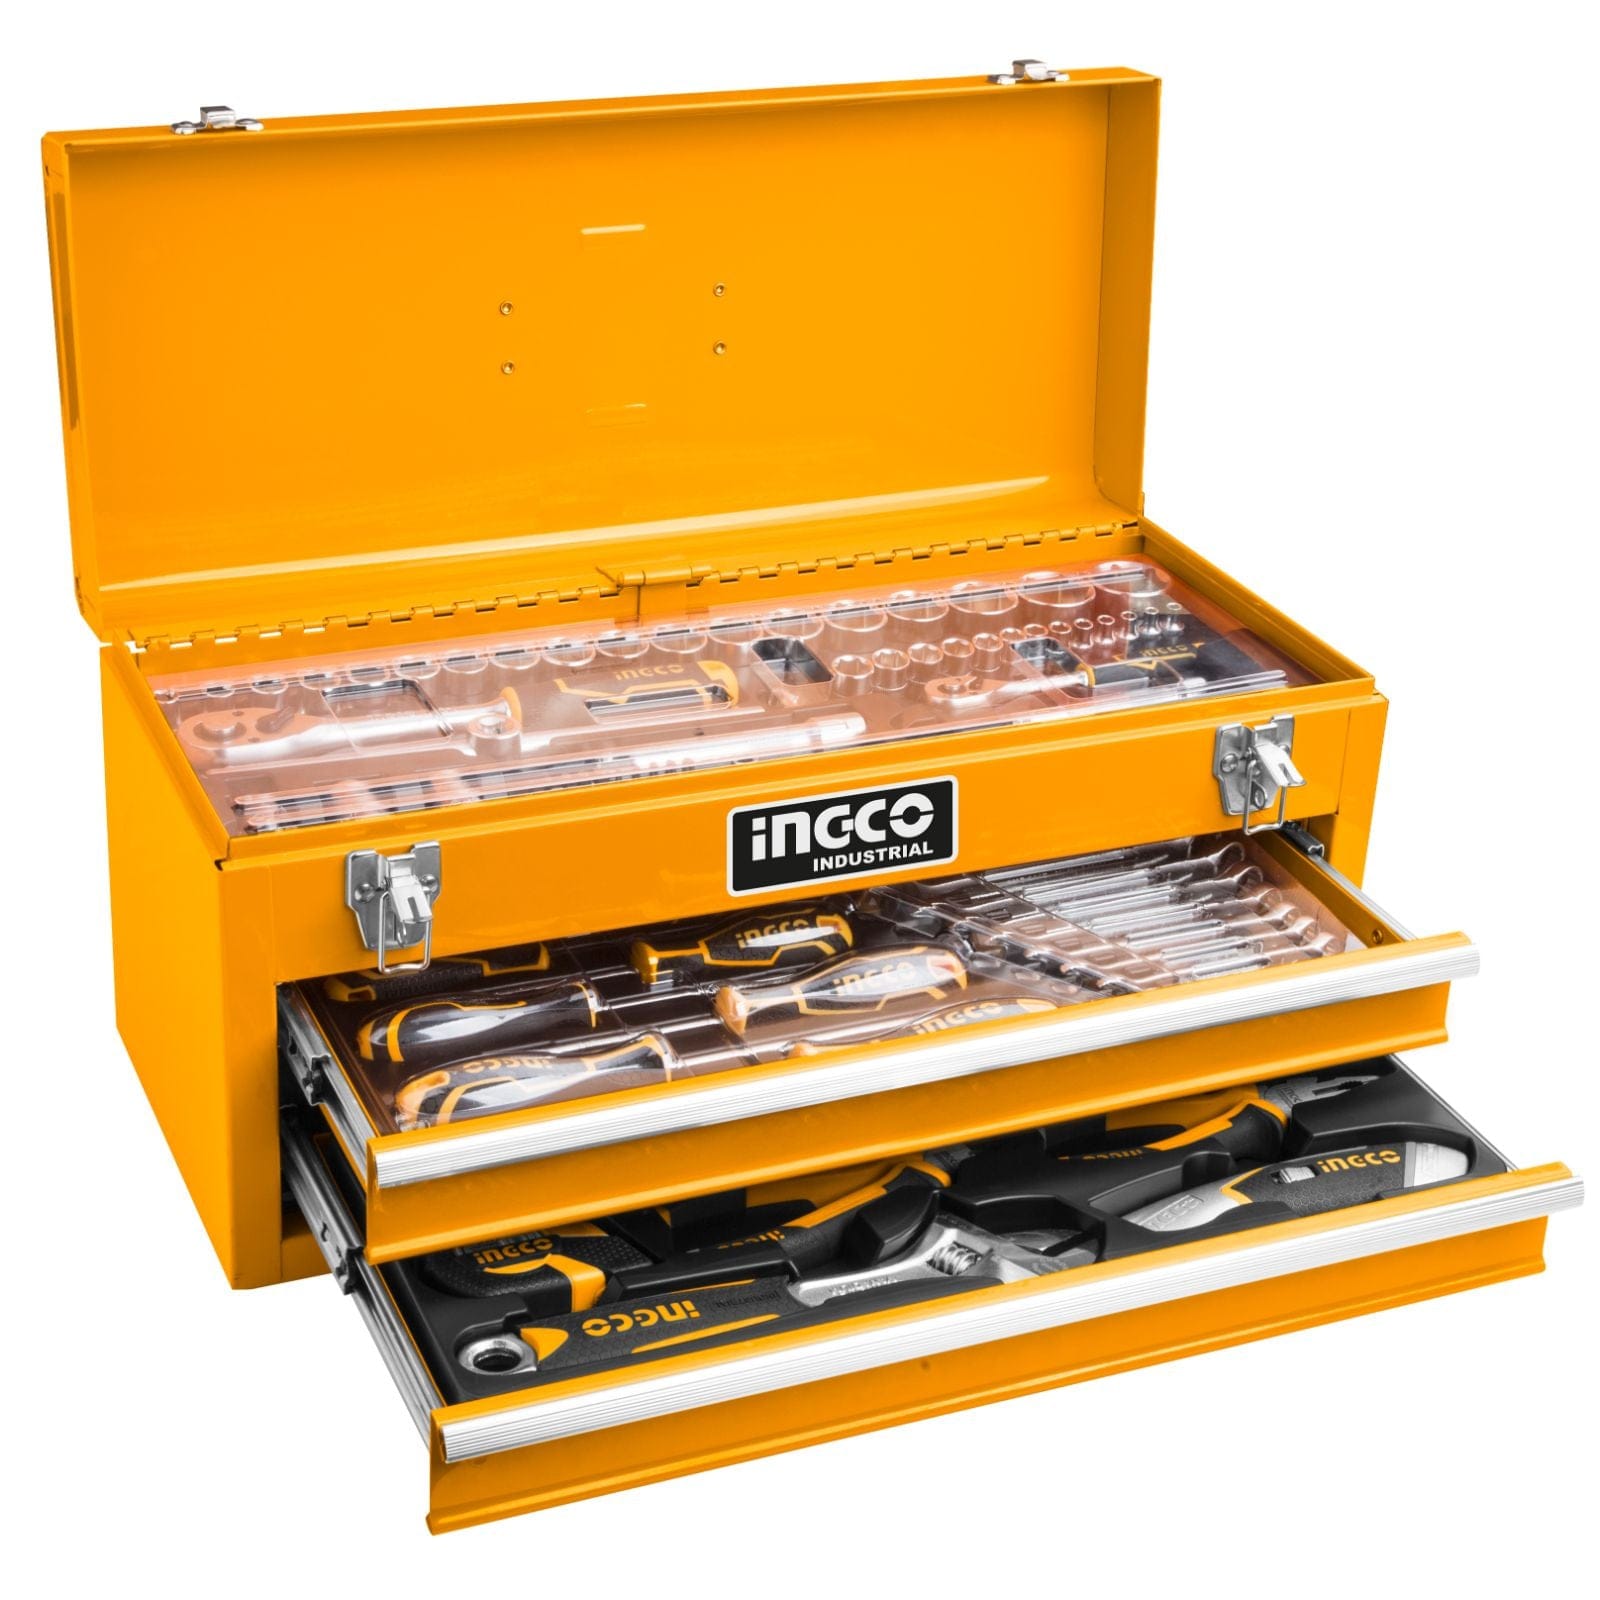 Ingco Portable Drawer Tool Box - HTB06 | Shop Online in Accra, Ghana - Supply Master Tool Boxes Bags & Belts Buy Tools hardware Building materials